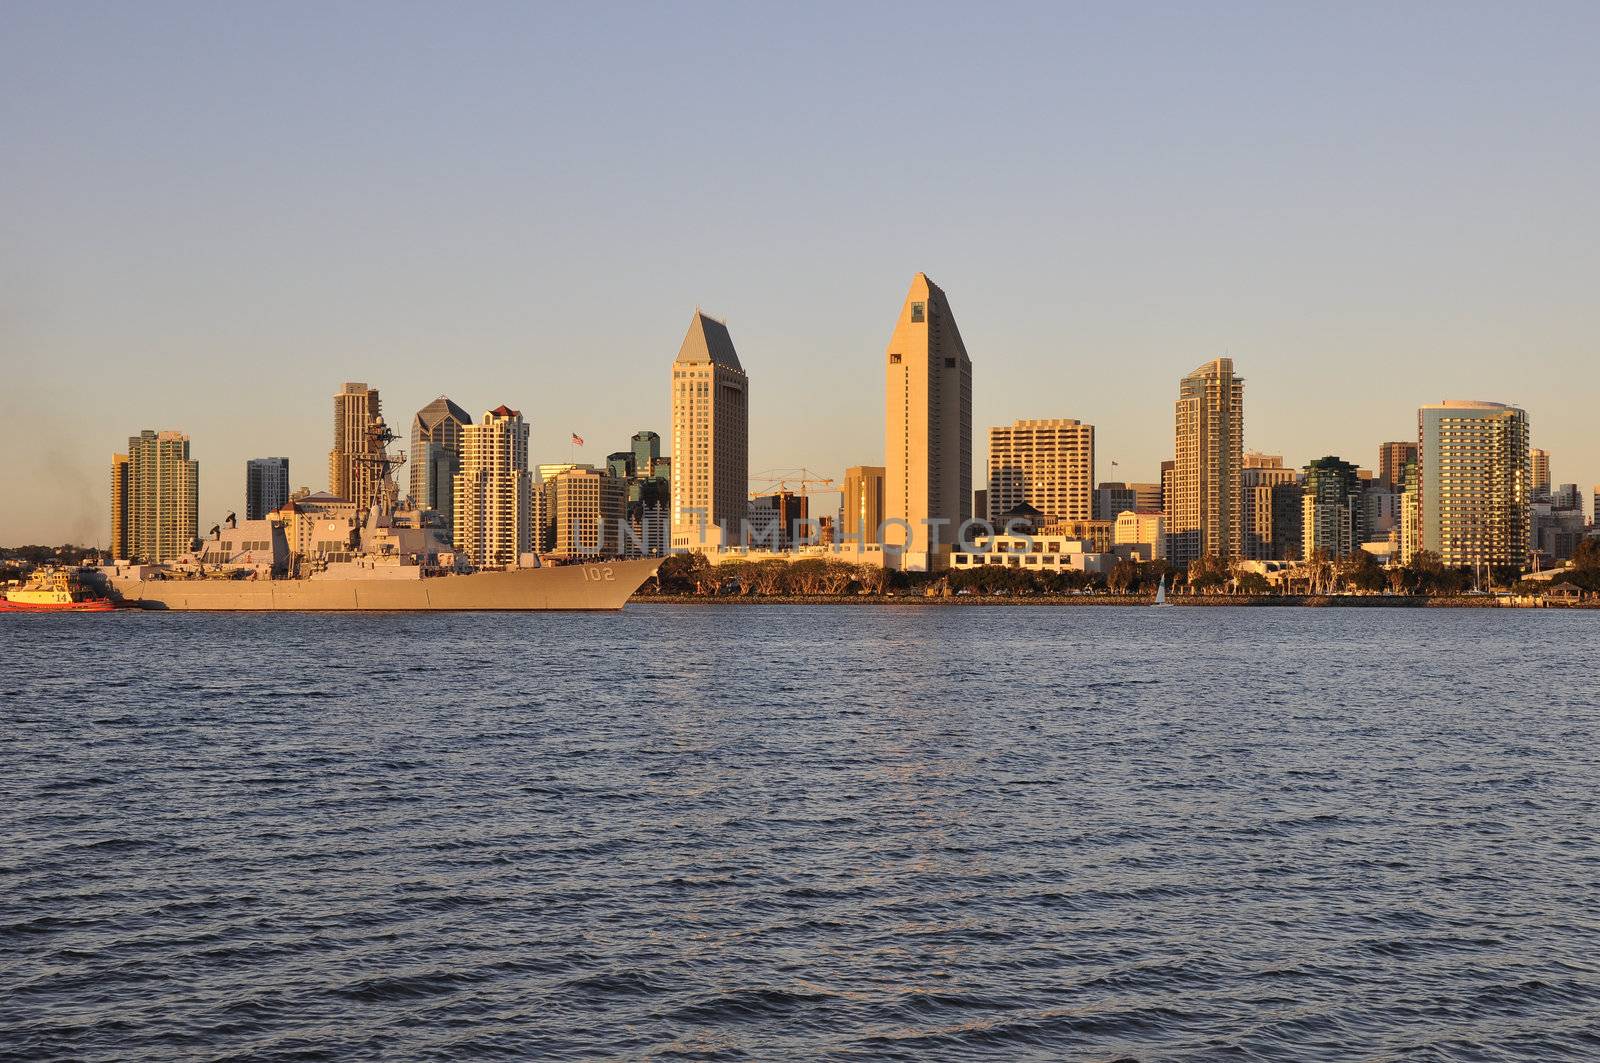 A U.S. Naval ship passes by the downtown San Diego skyline in Southern California.